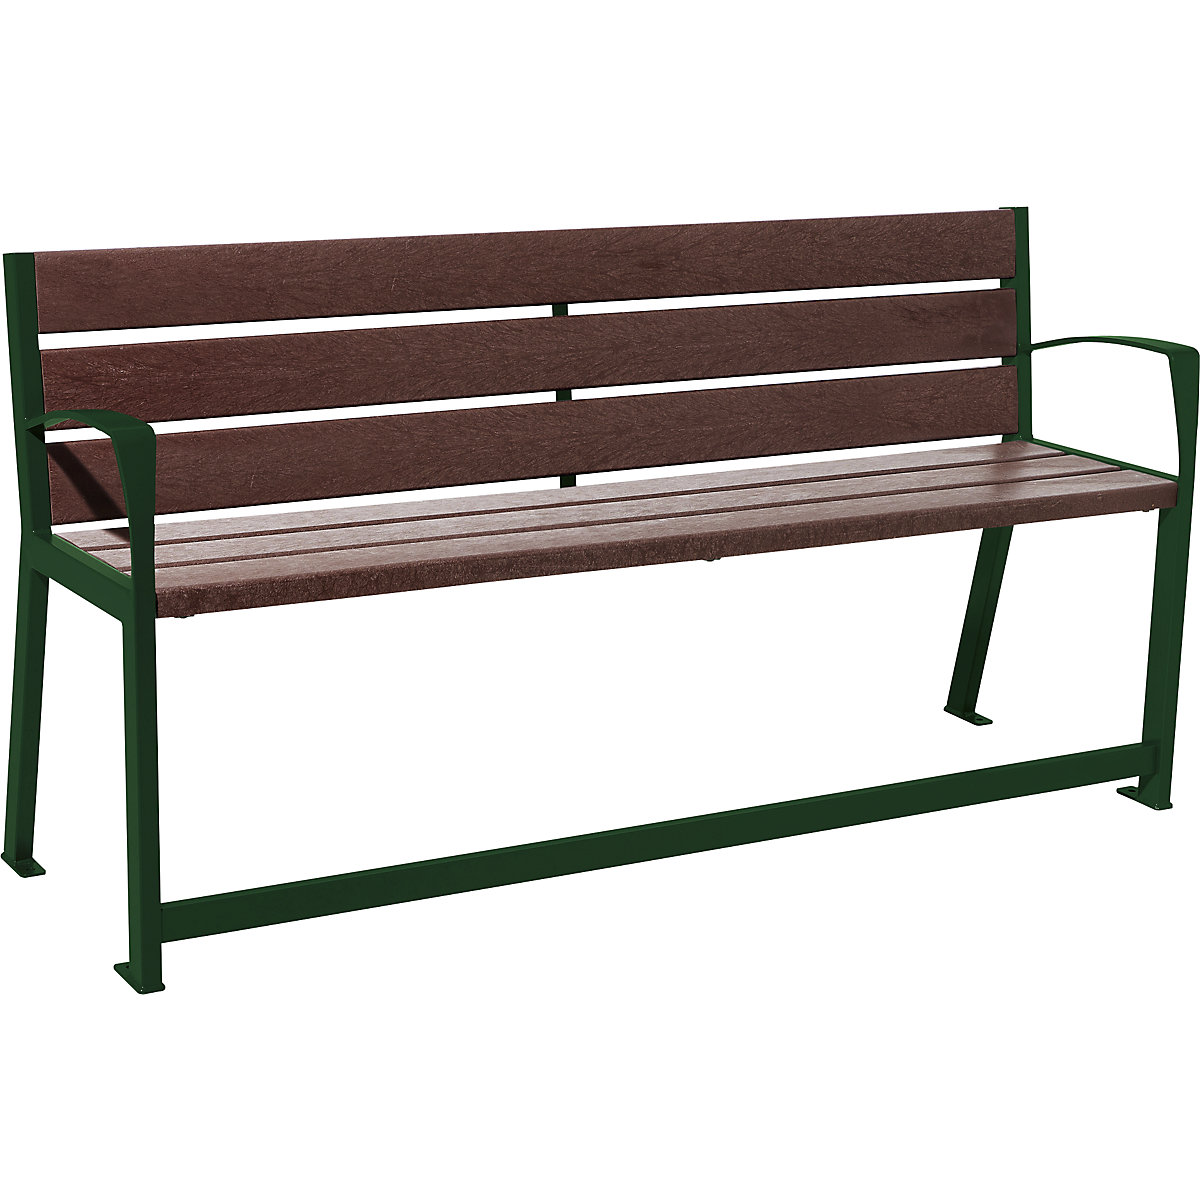 SILAOS® bench made of recycled plastic - PROCITY